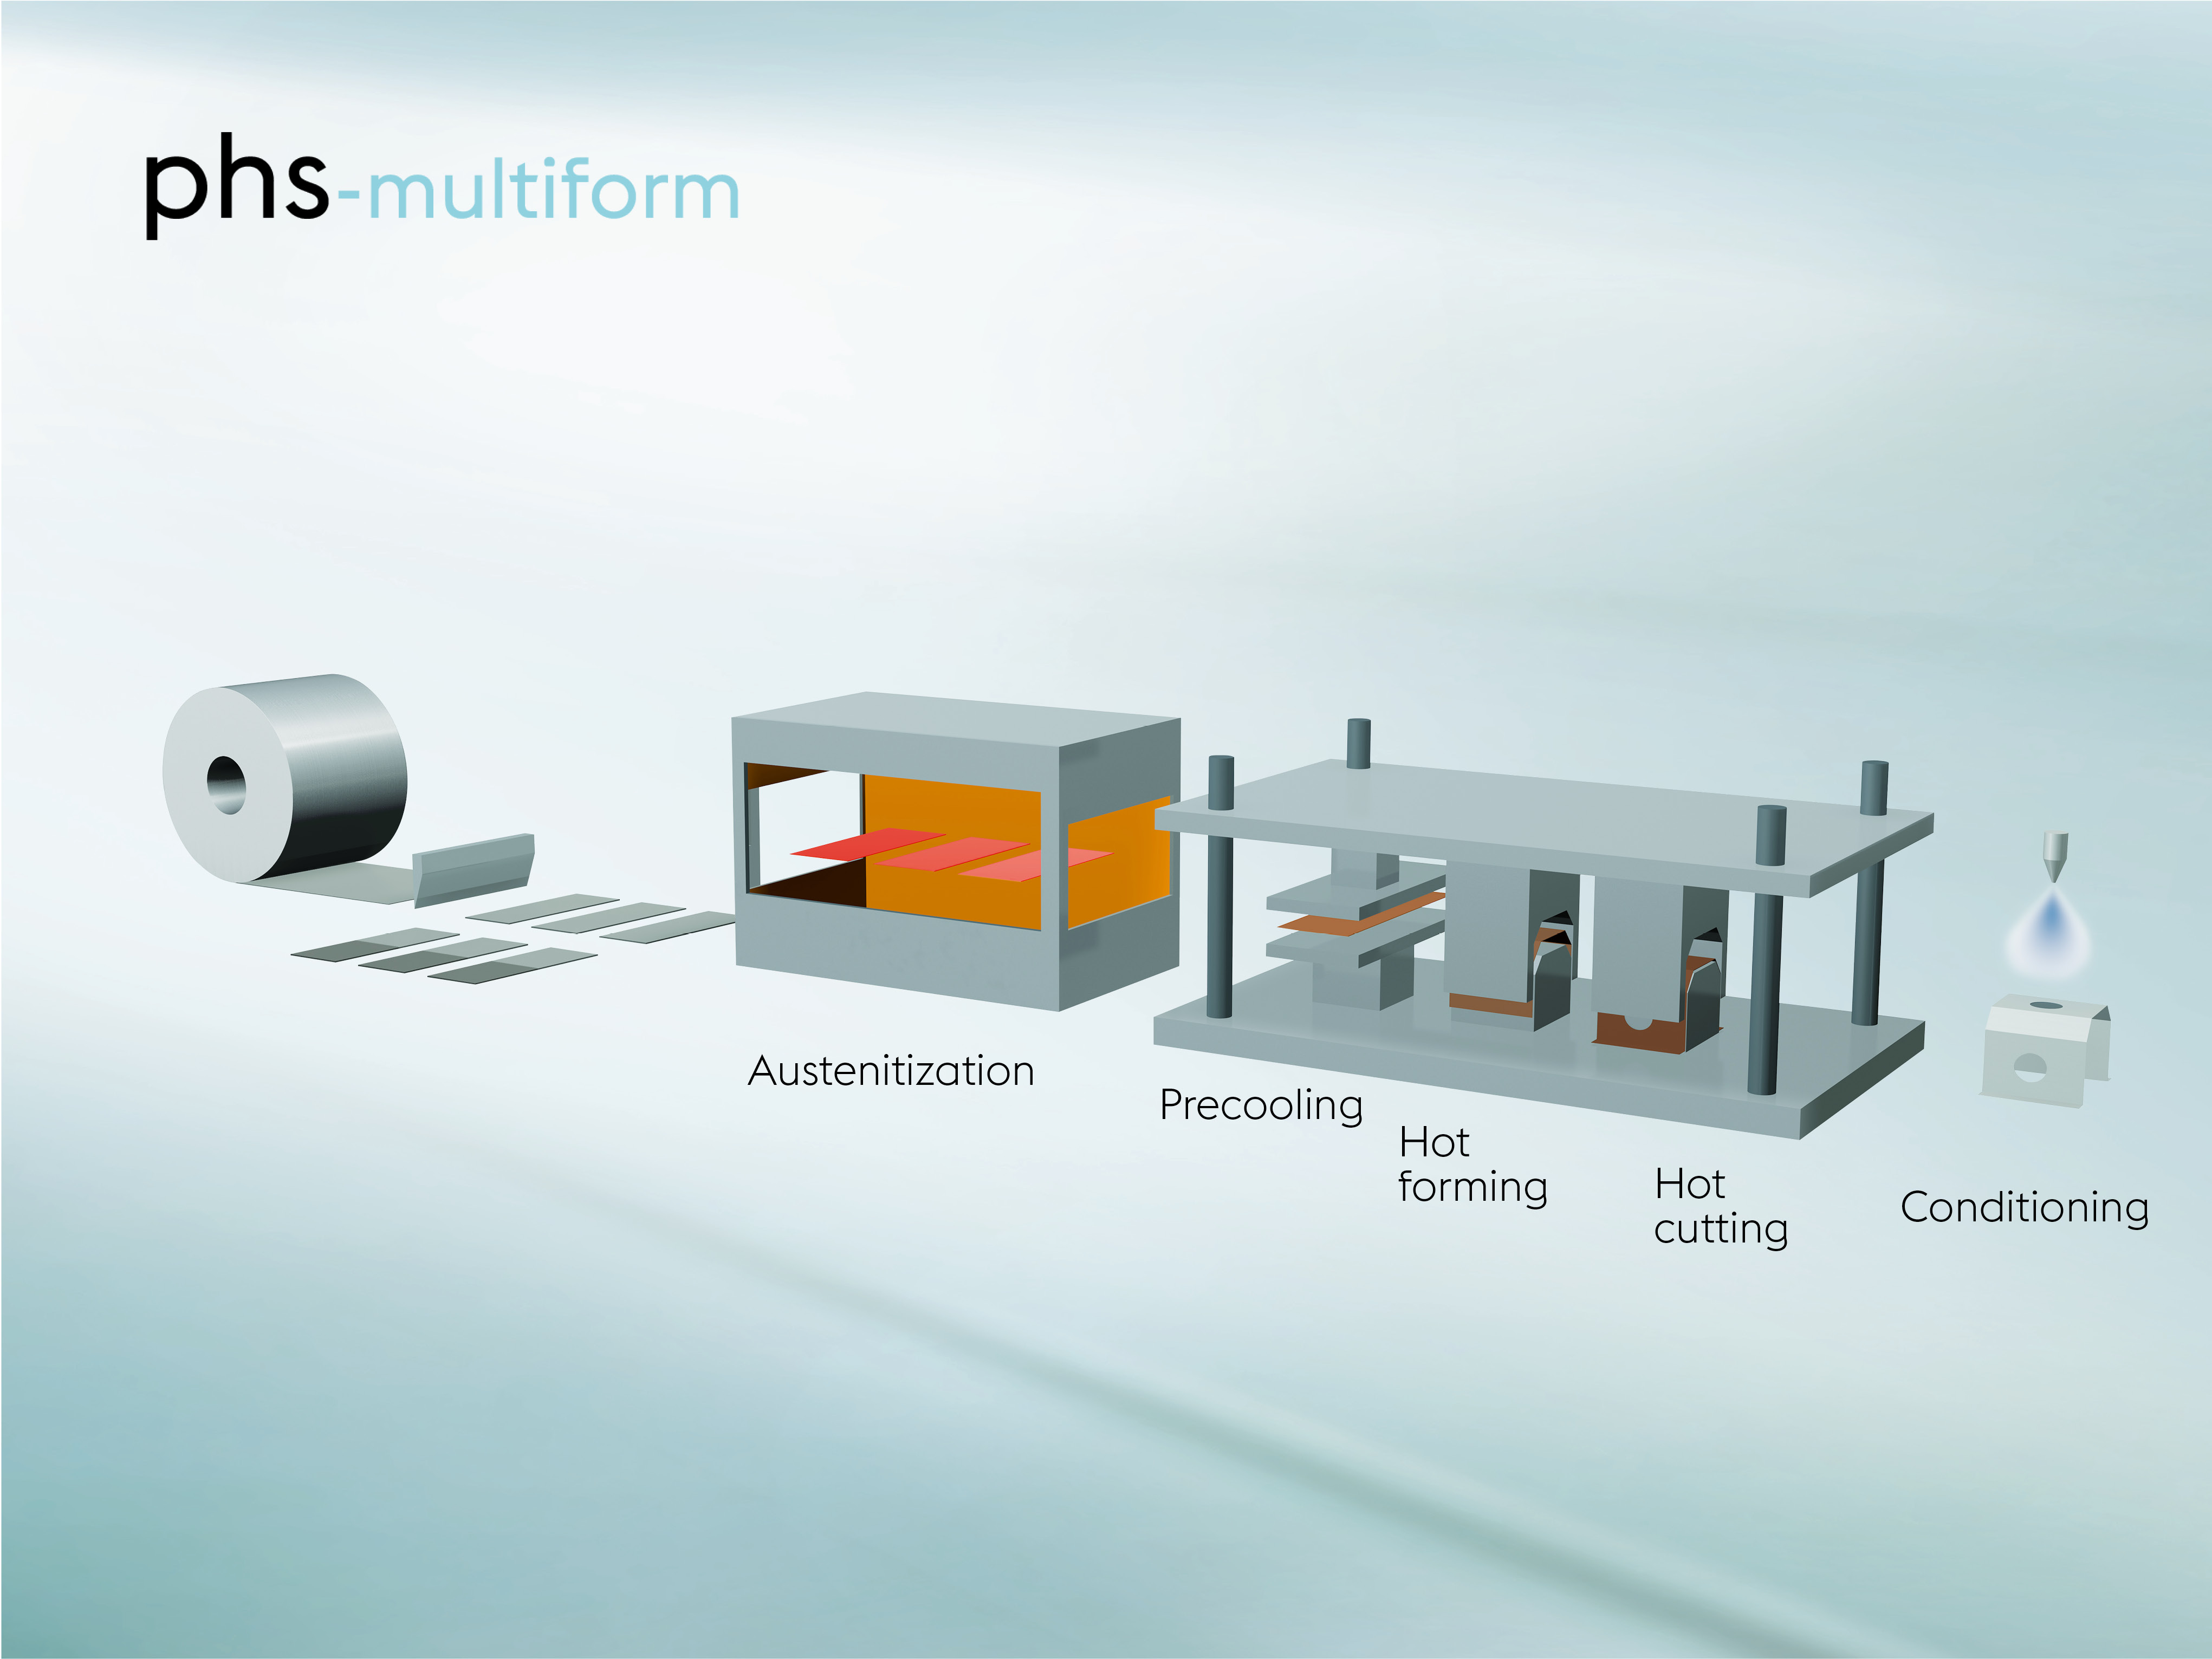 phs-multiform for a reduction in the number of process steps material